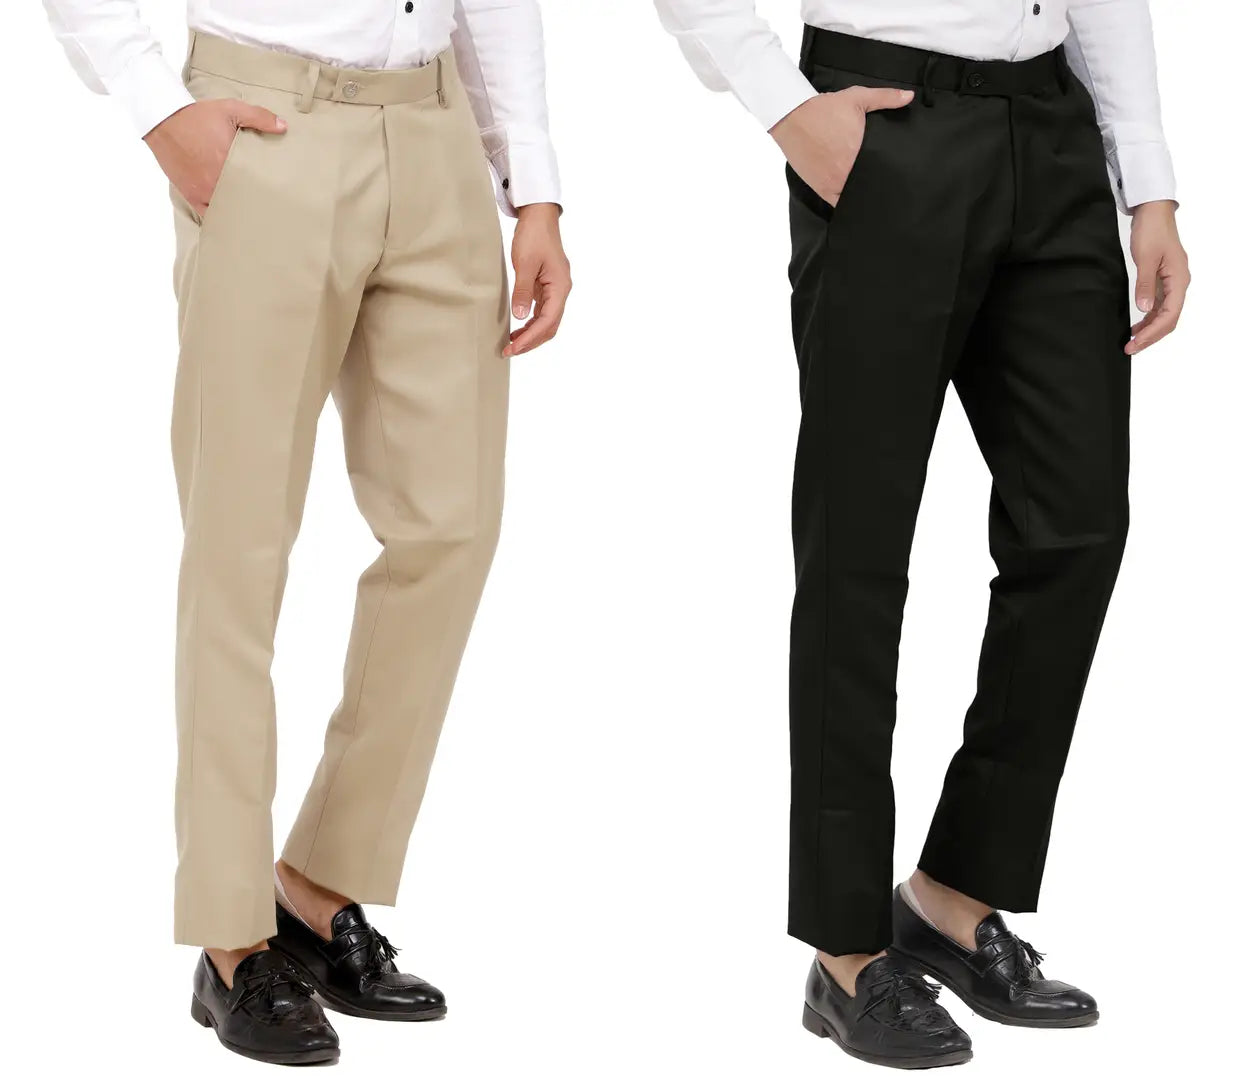 Kundan Men Poly-Viscose Blended Beige and Black Formal Trousers ( Pack of 2 Trousers )